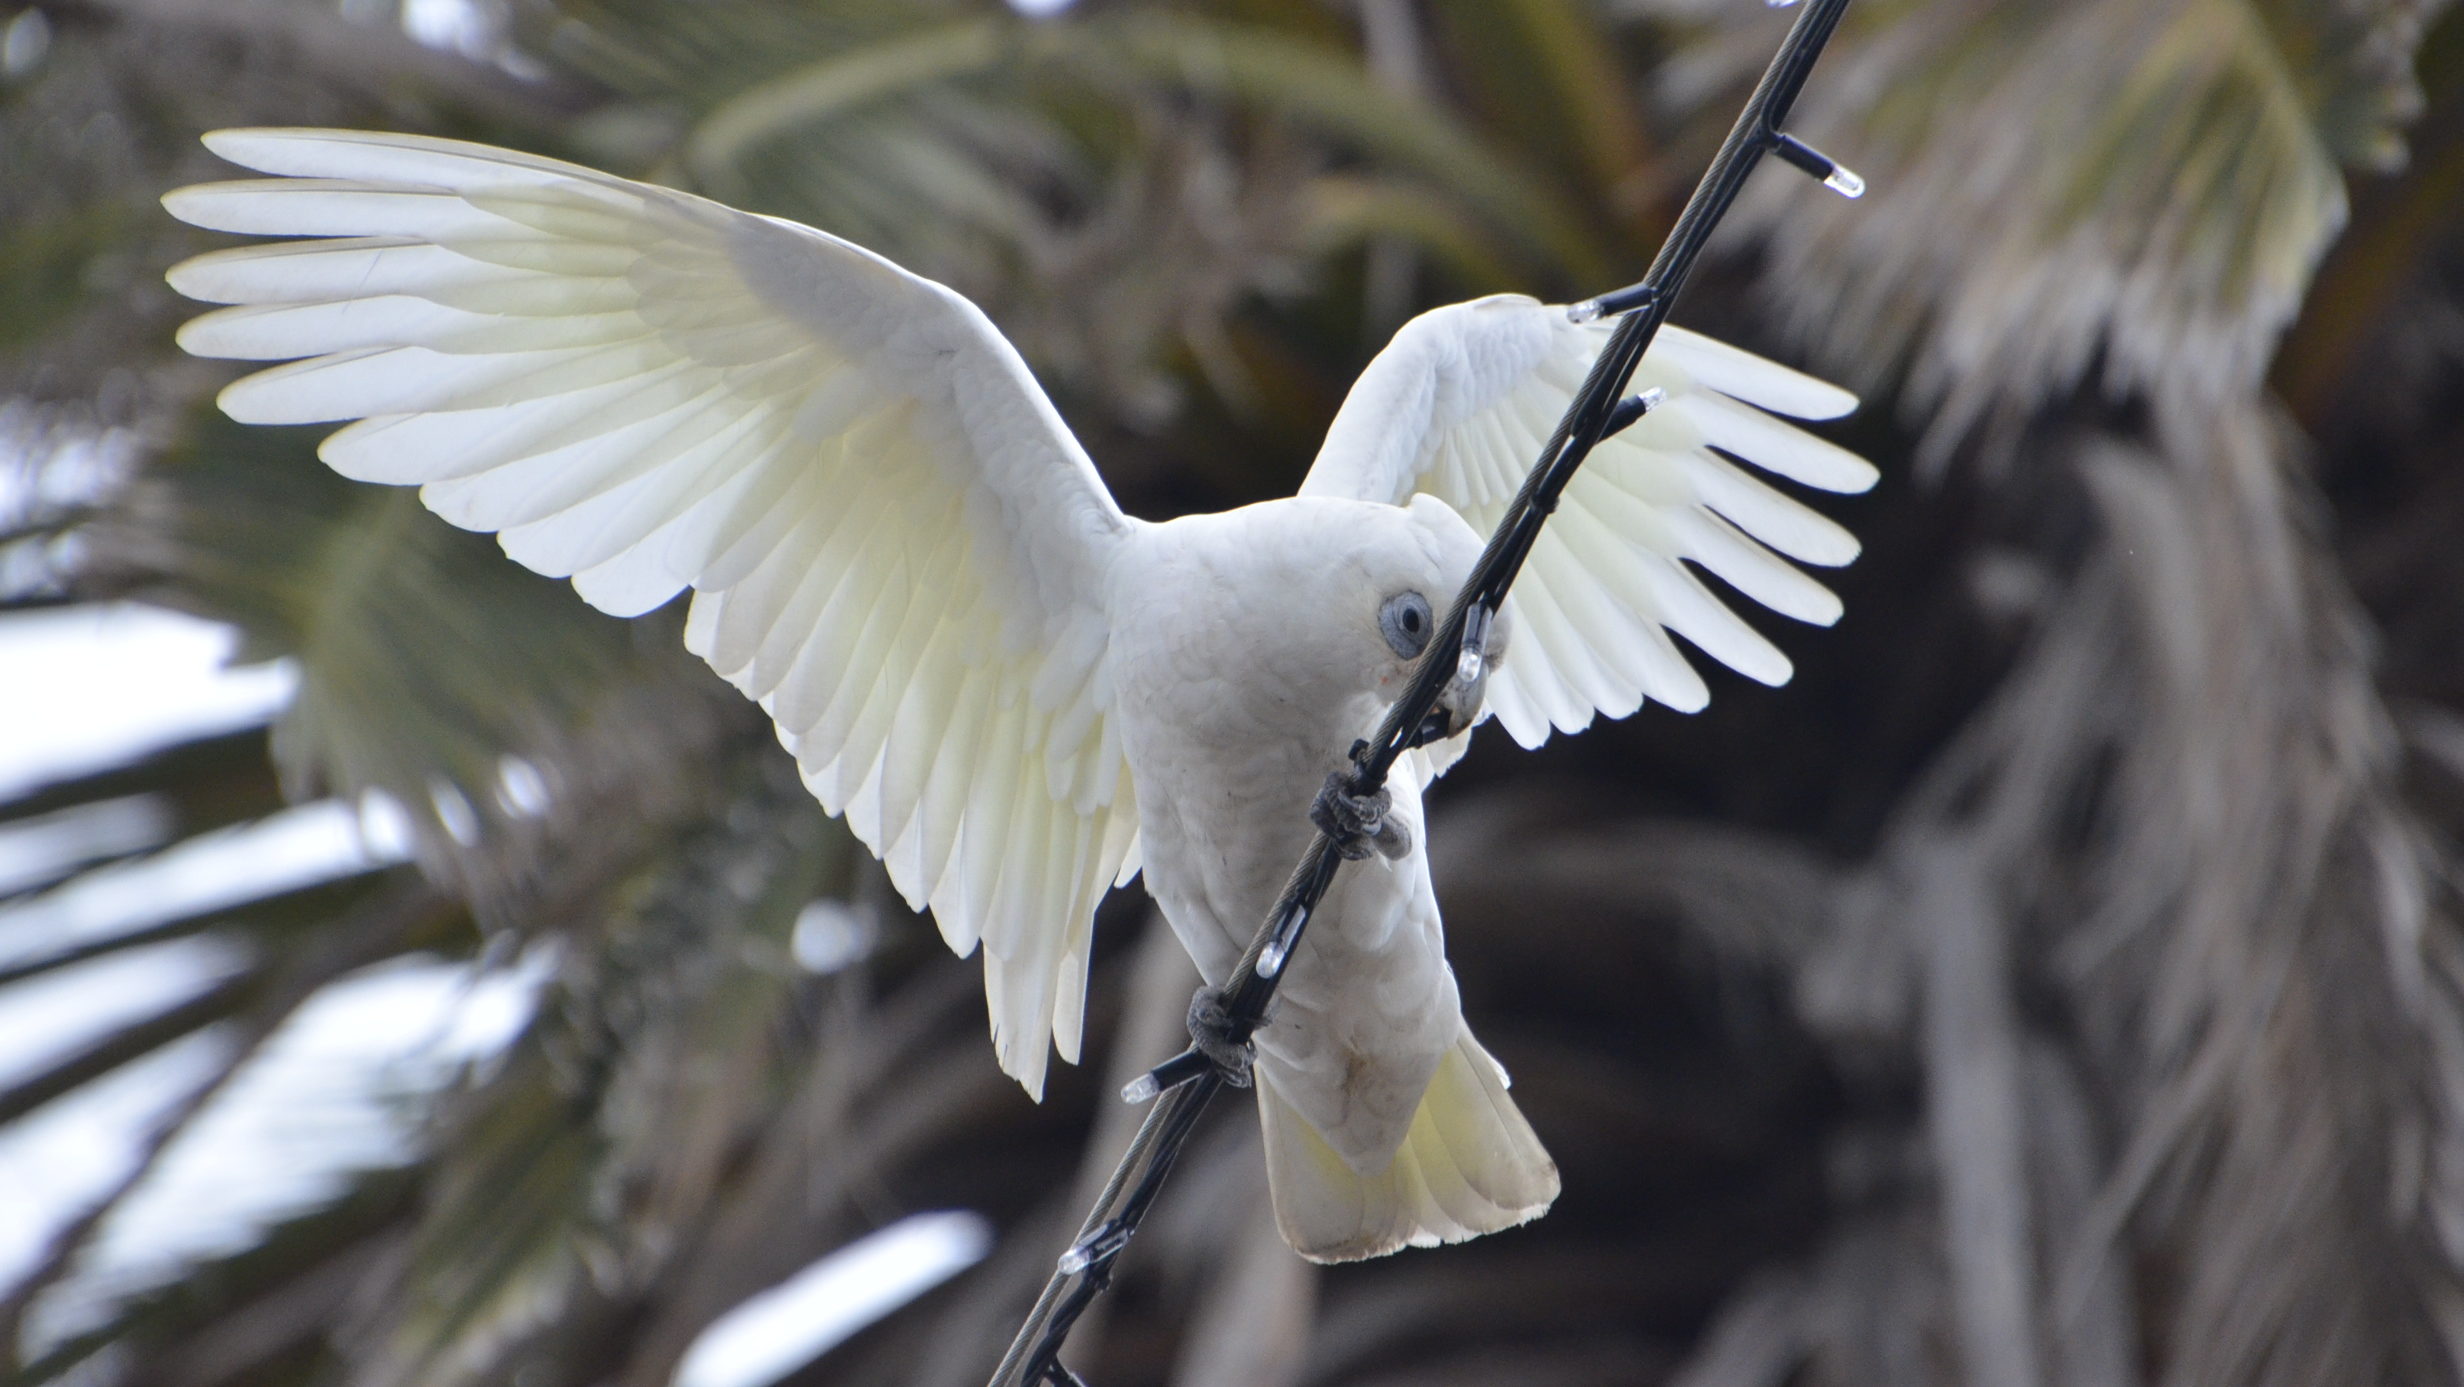 Corella sitting on a string of decorative lighting with trees in the background